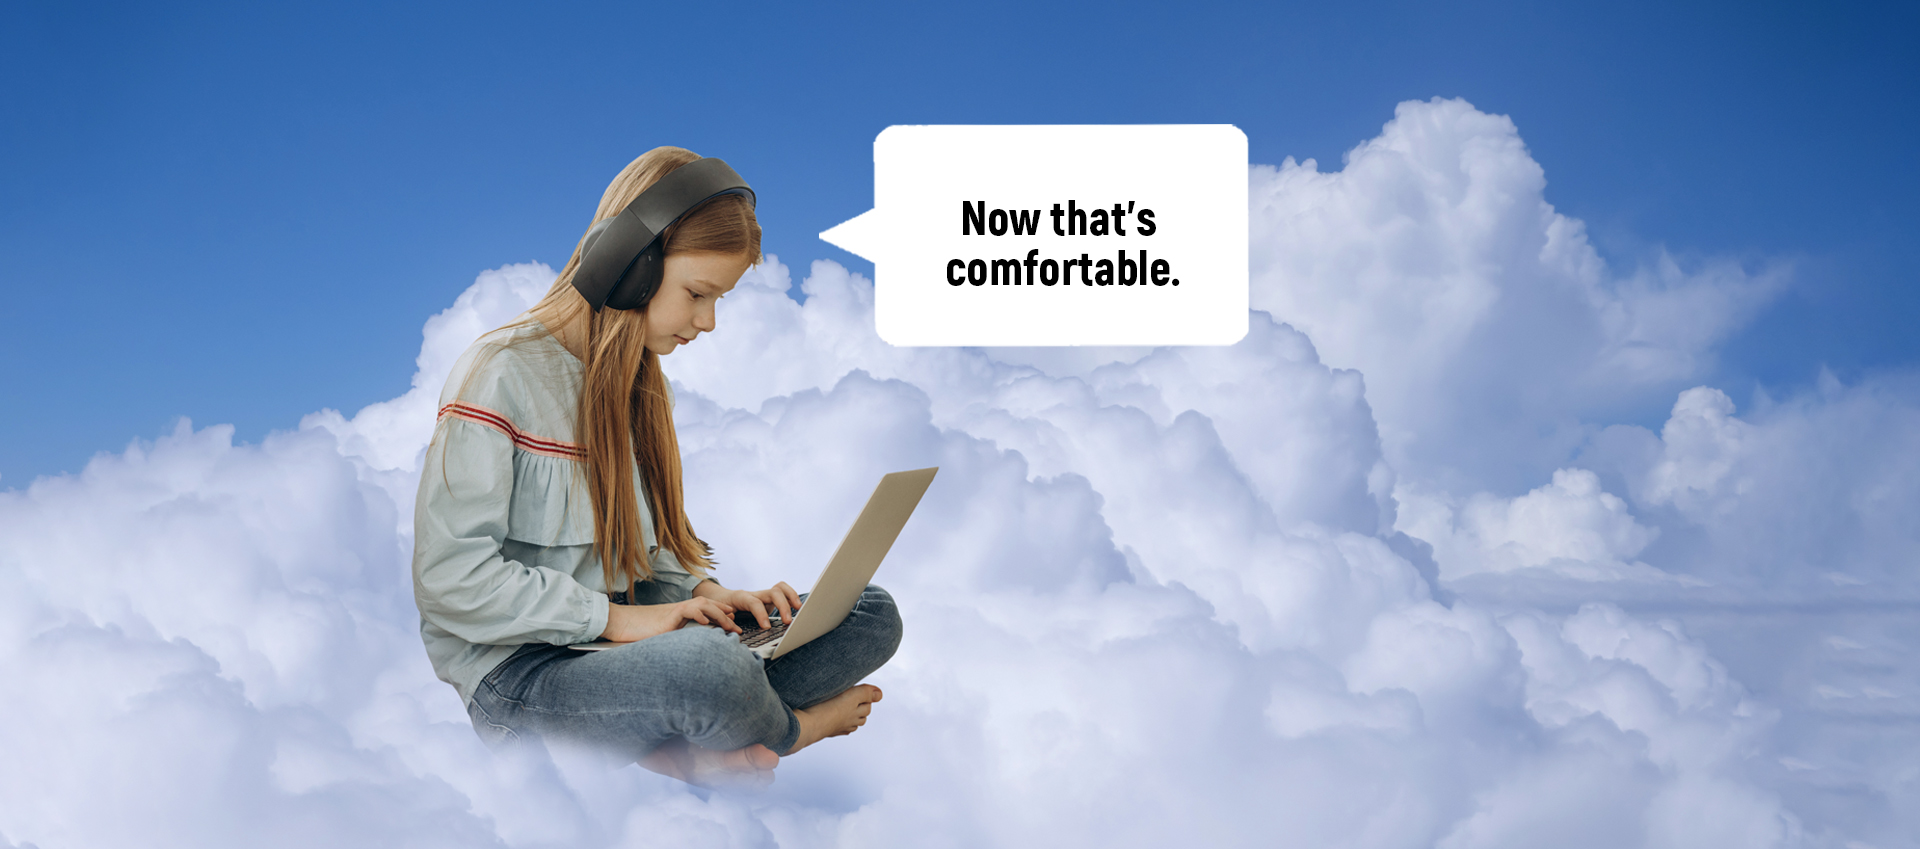 Is Online Learning Best with Cloud Technology?